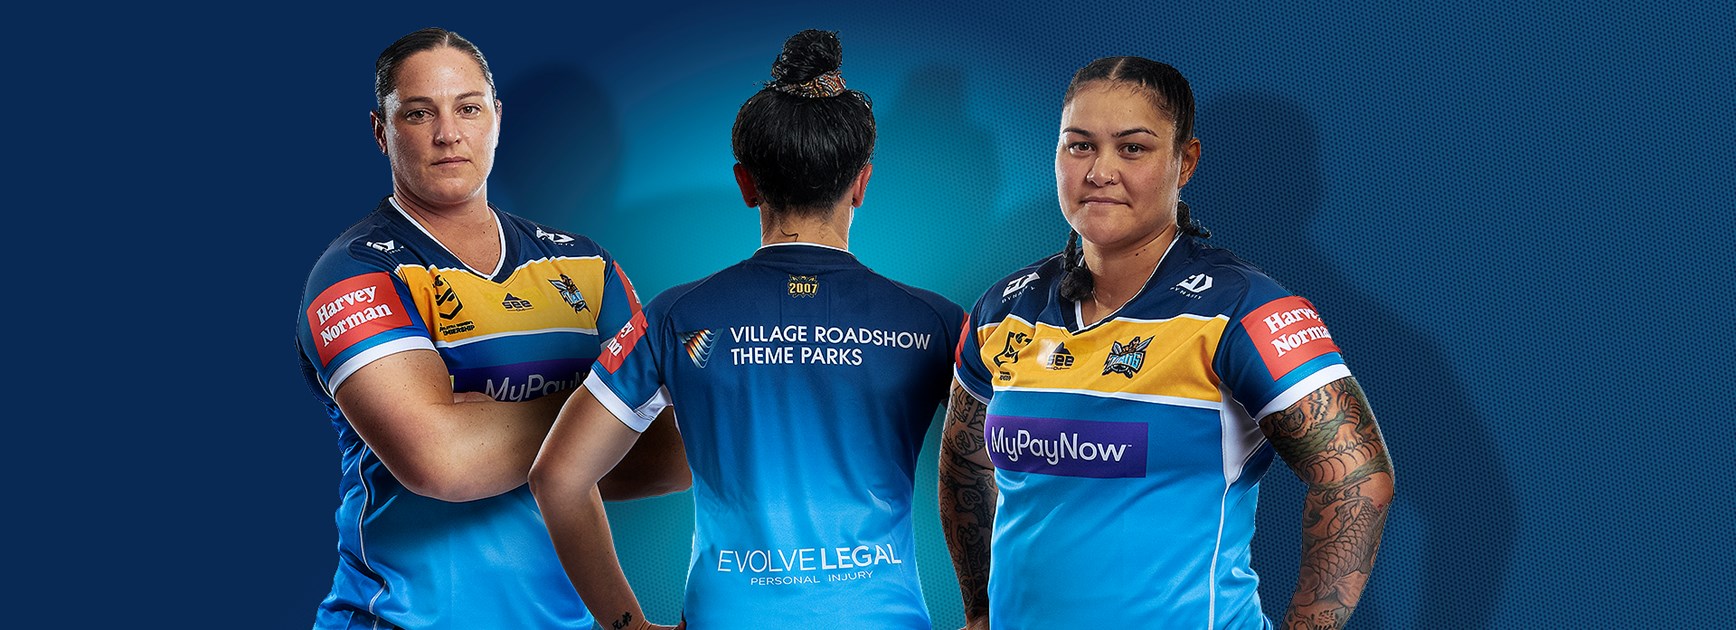 Titans lock up Hancock, Peters and Evolve Legal for NRLW campaign